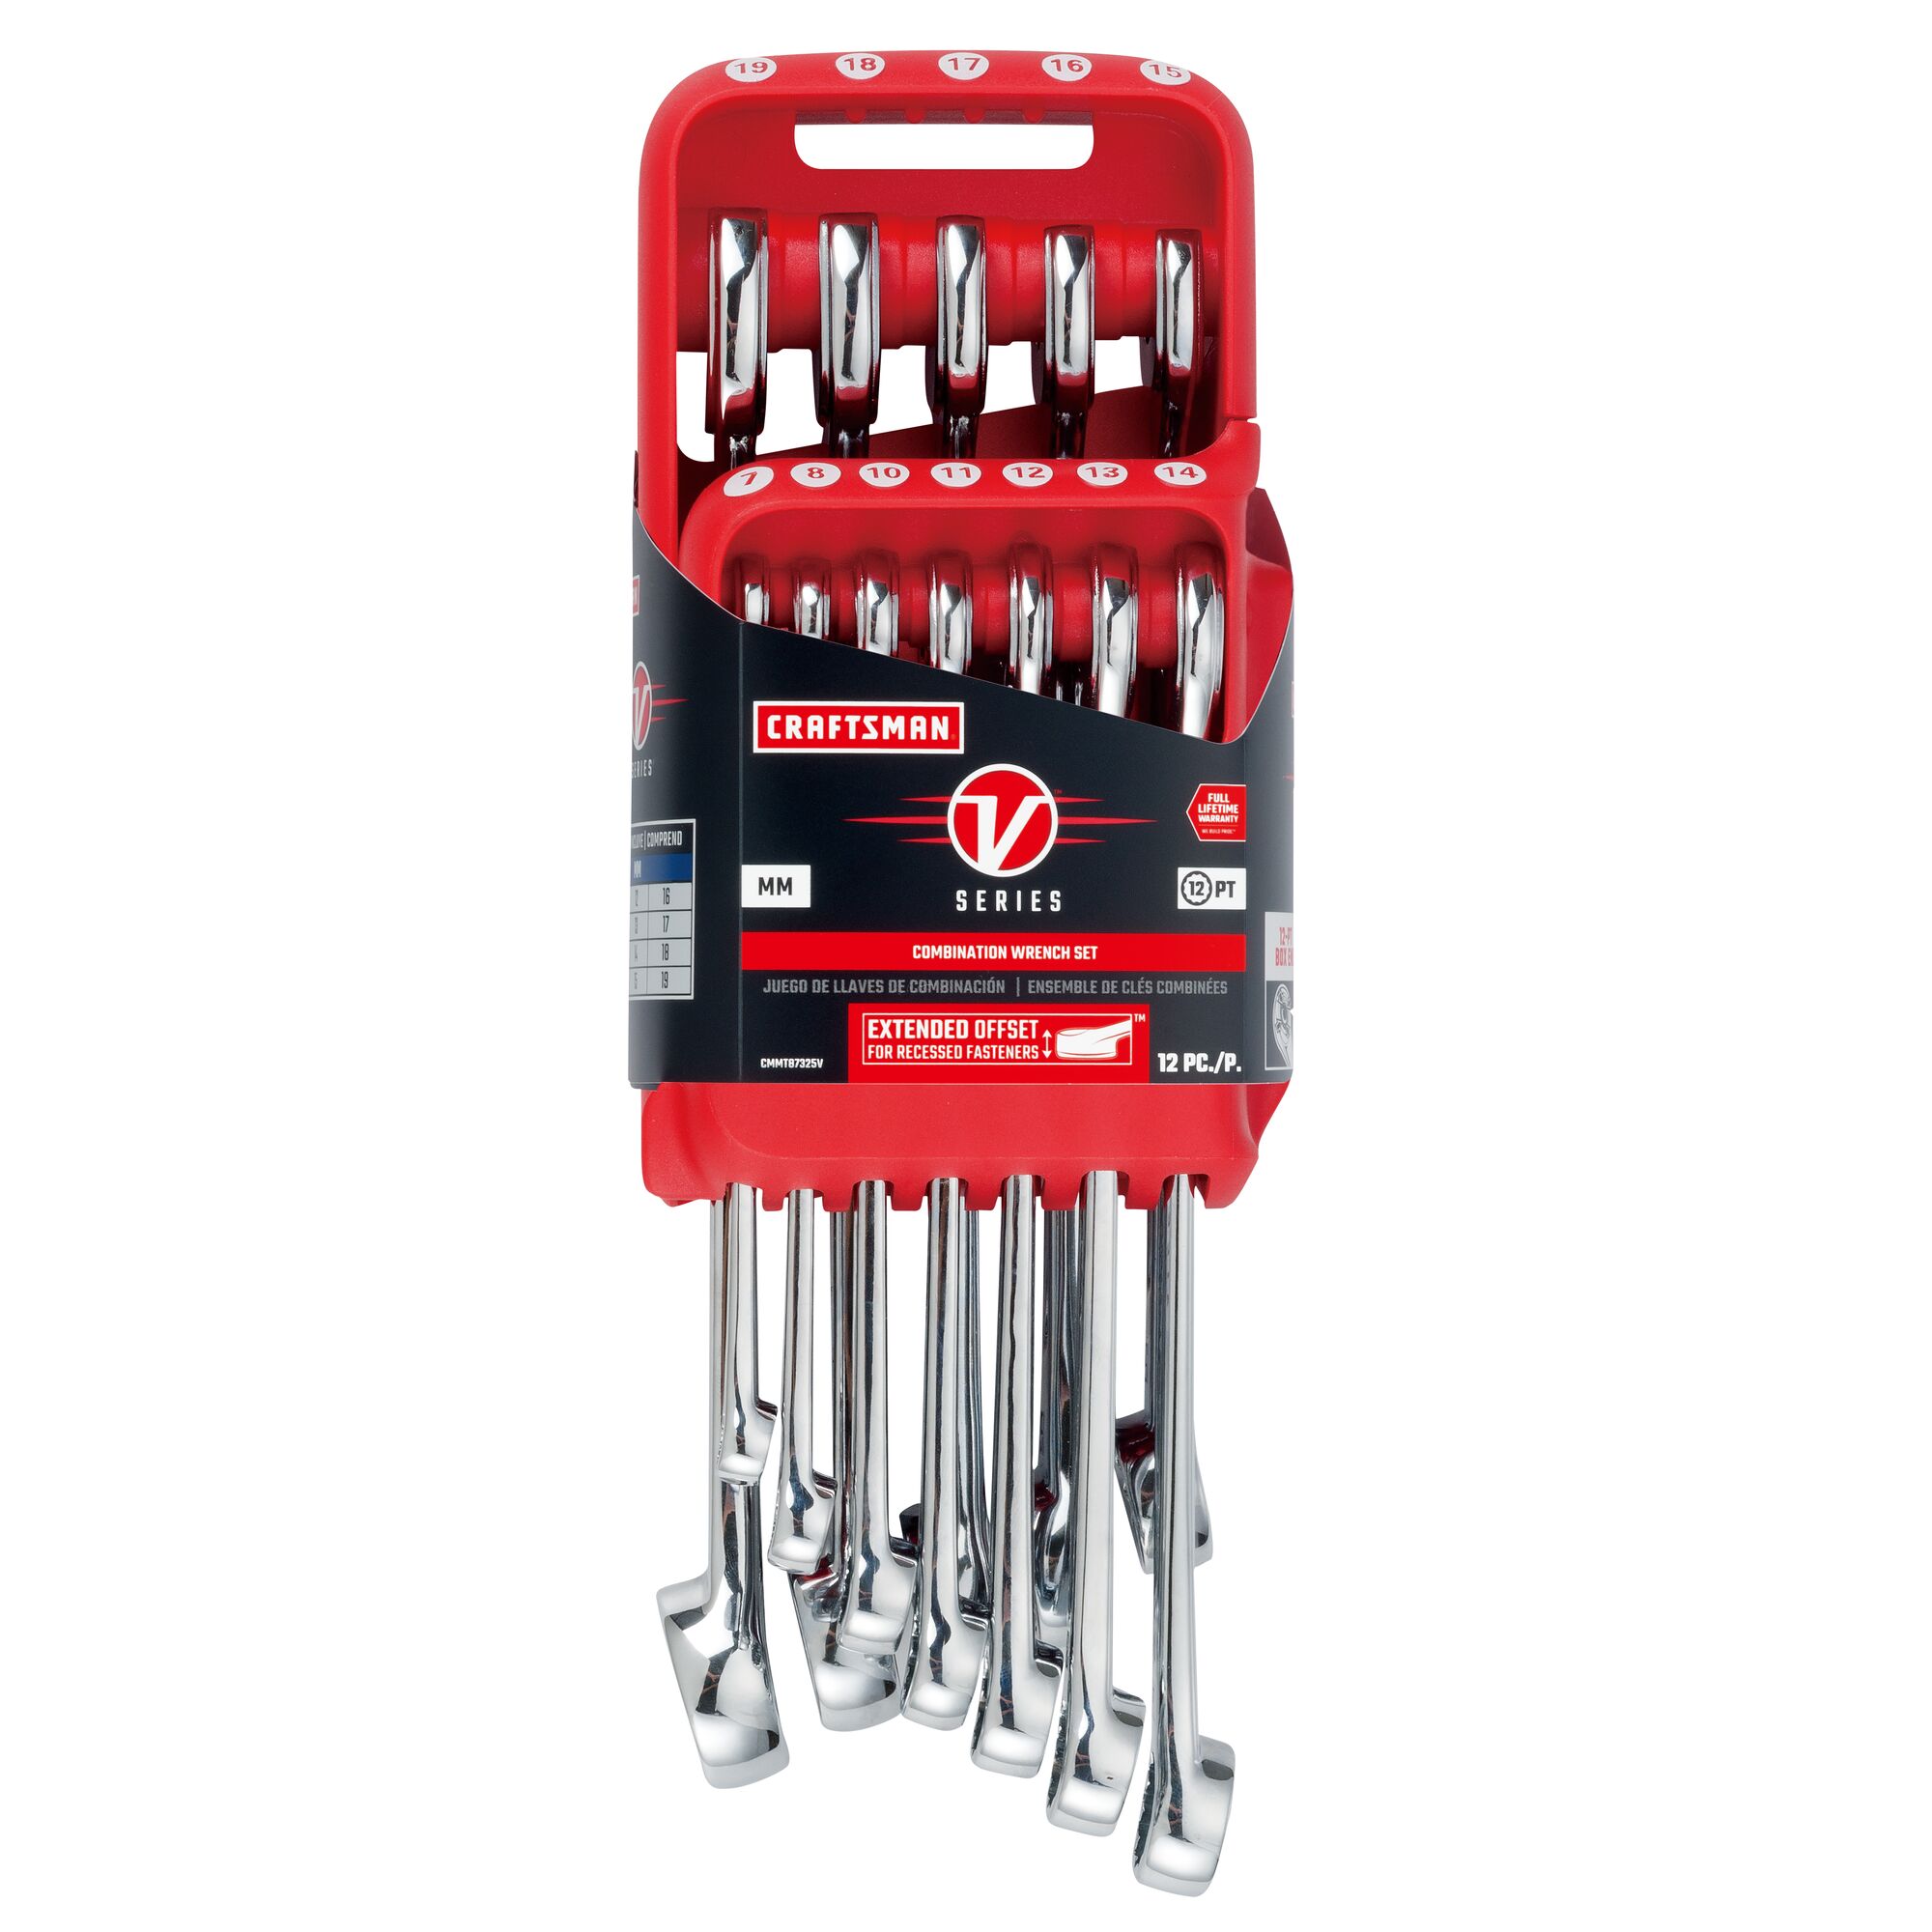 V series metric combination wrench set (12 piece) in packaging.